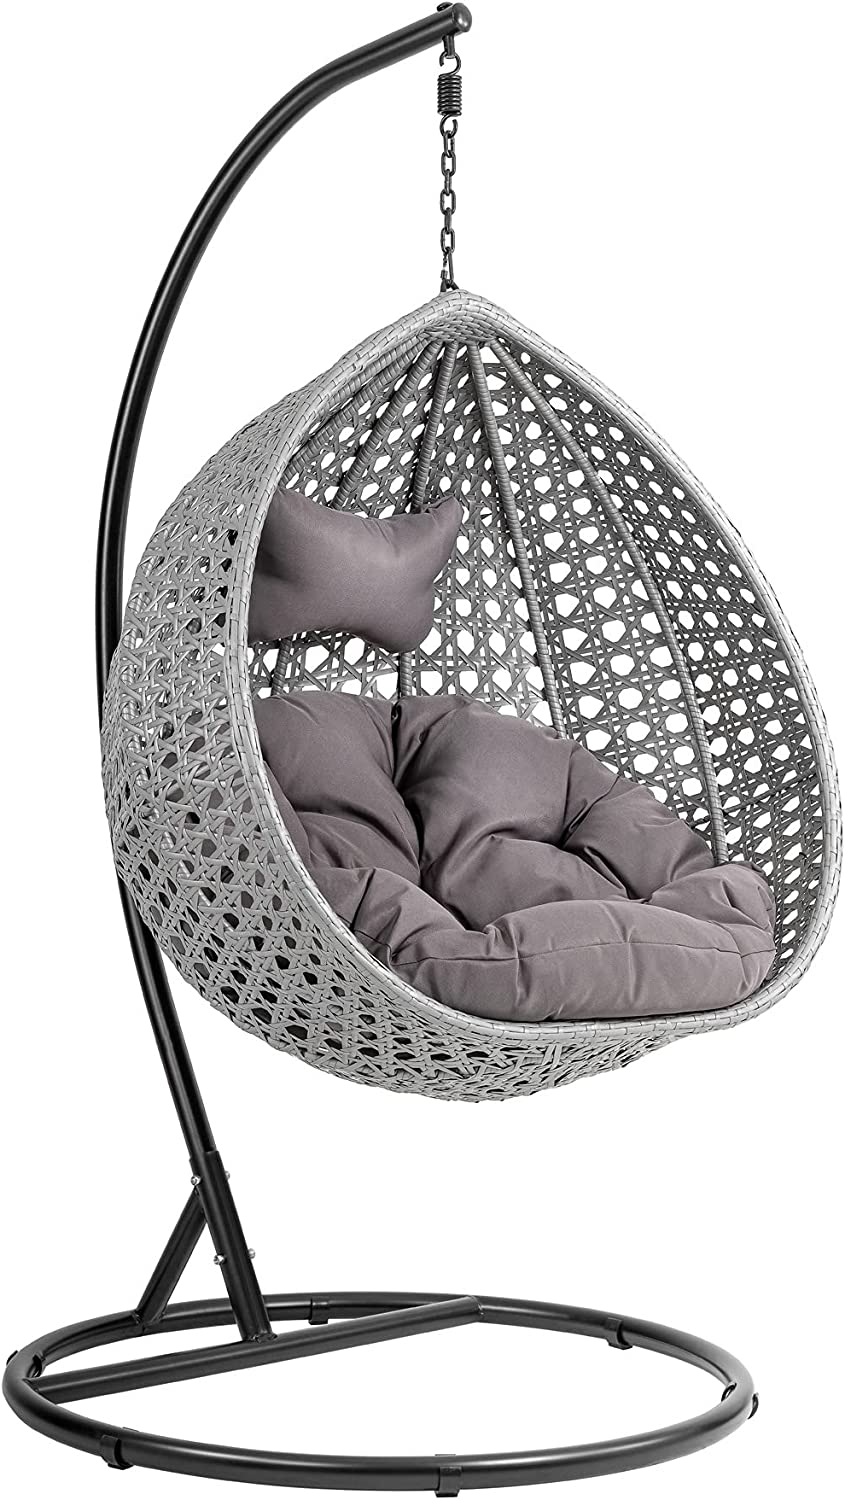 Elliott Single Seater Hanging Swing With Stand For Balcony , Garden